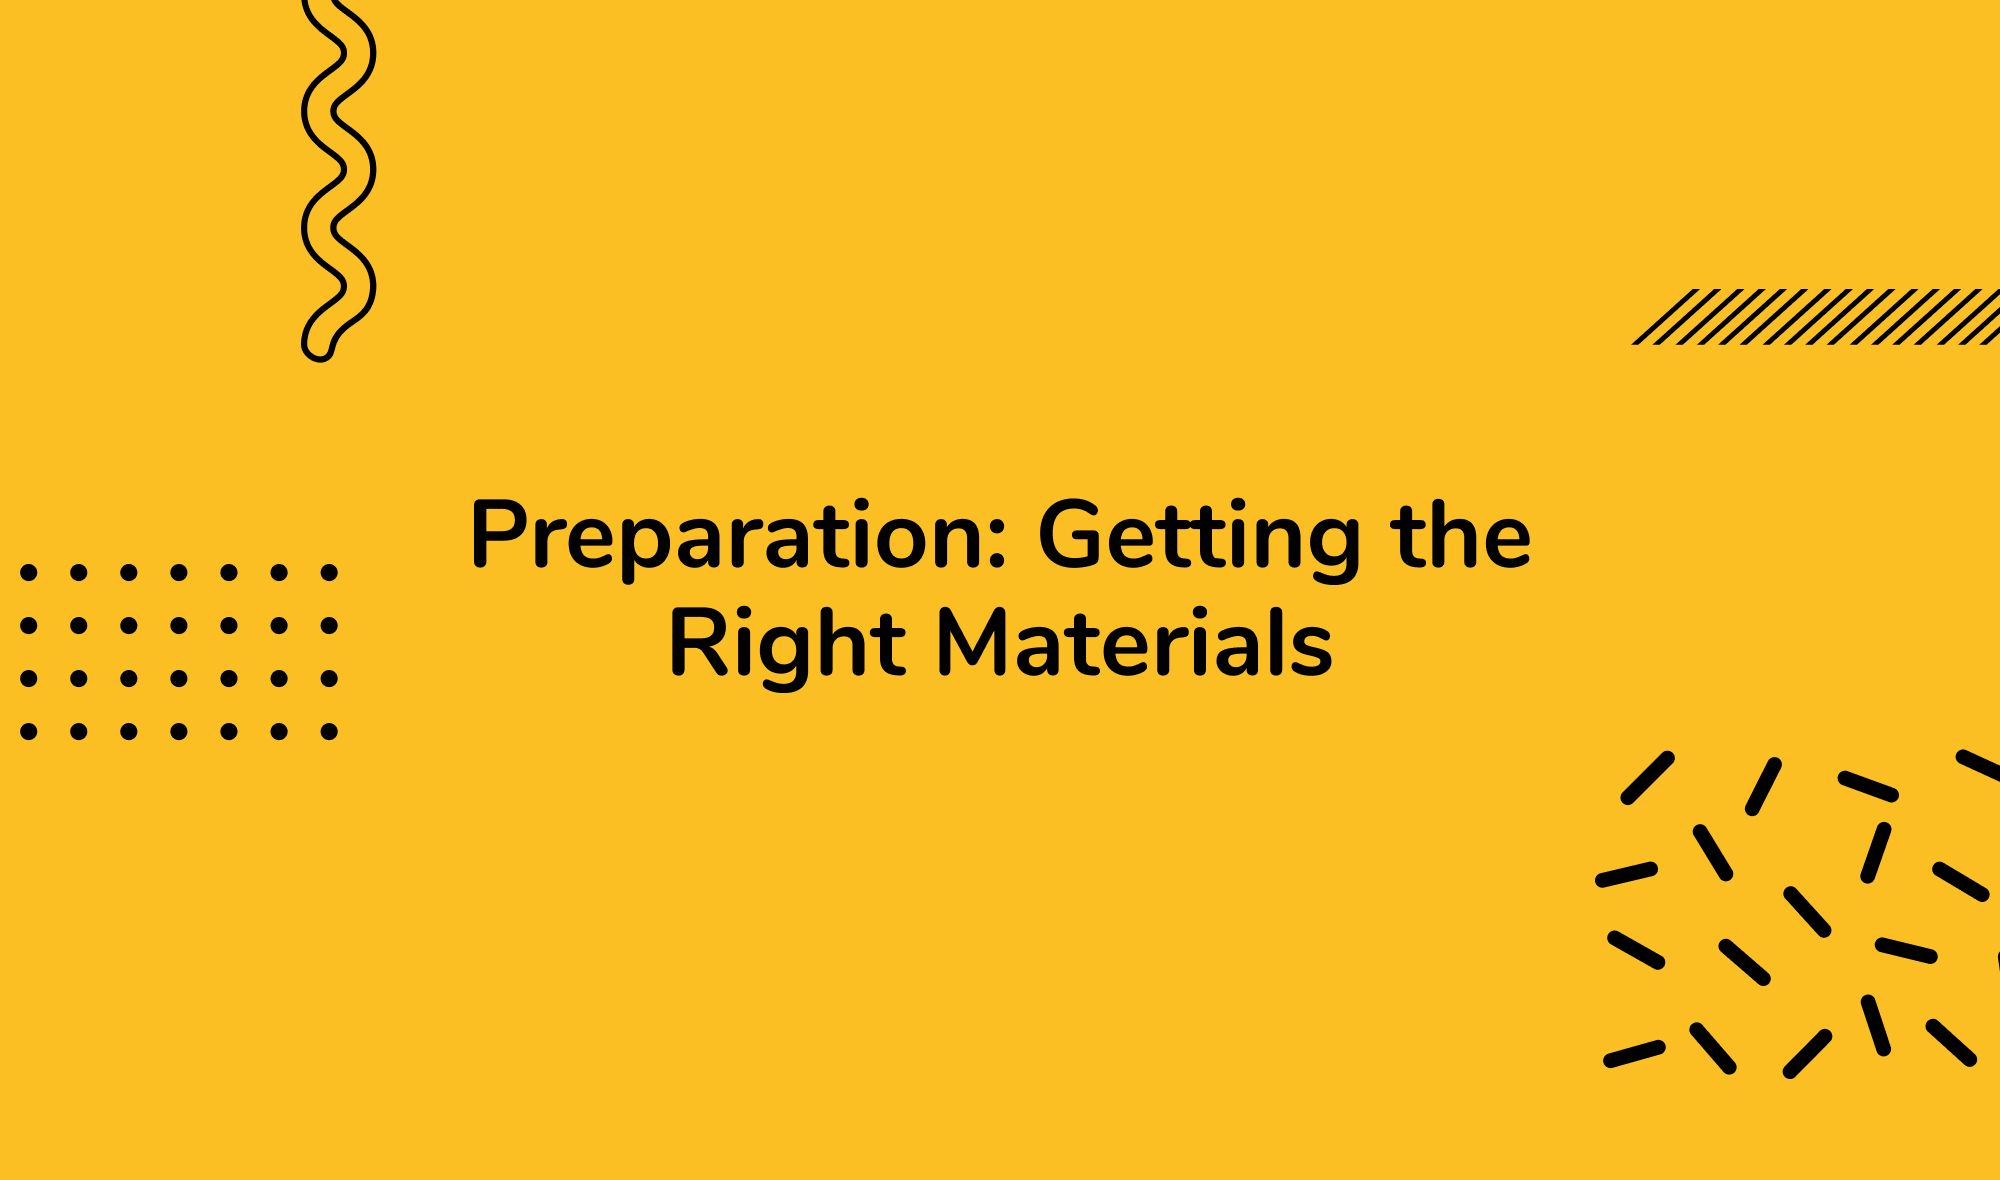 Preparation: Getting the Right Materials